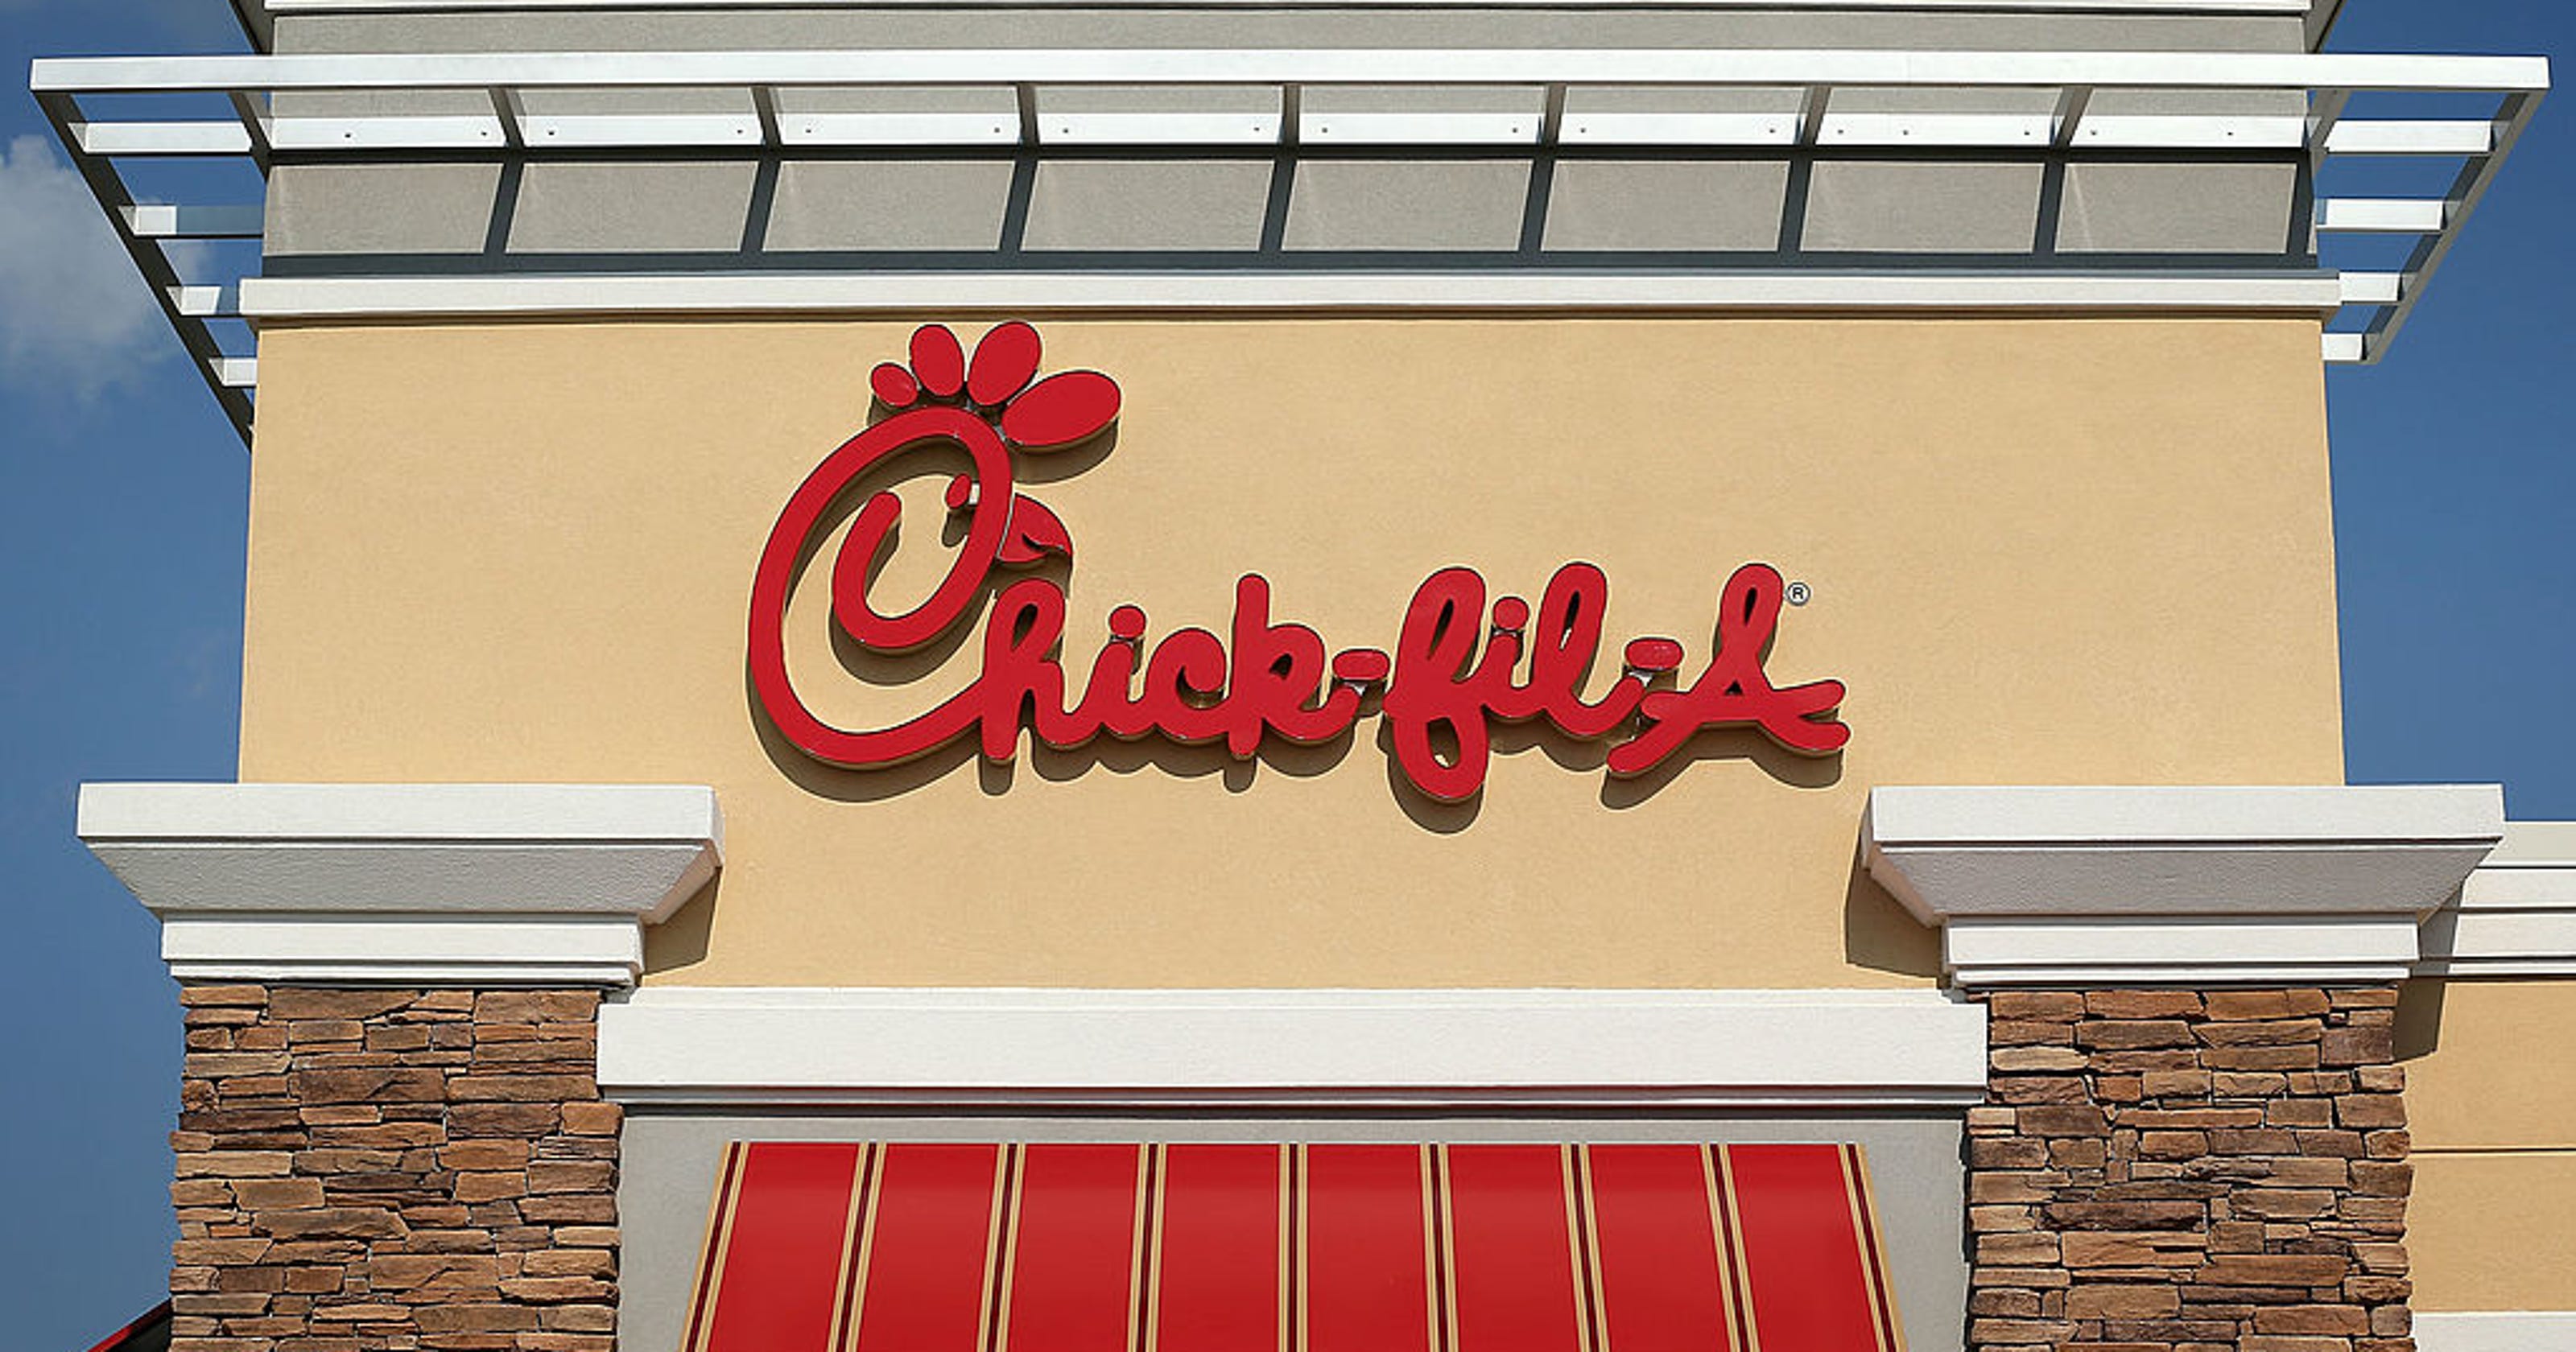 Chick-fil-A is America's No. 1 fast-food restaurant again